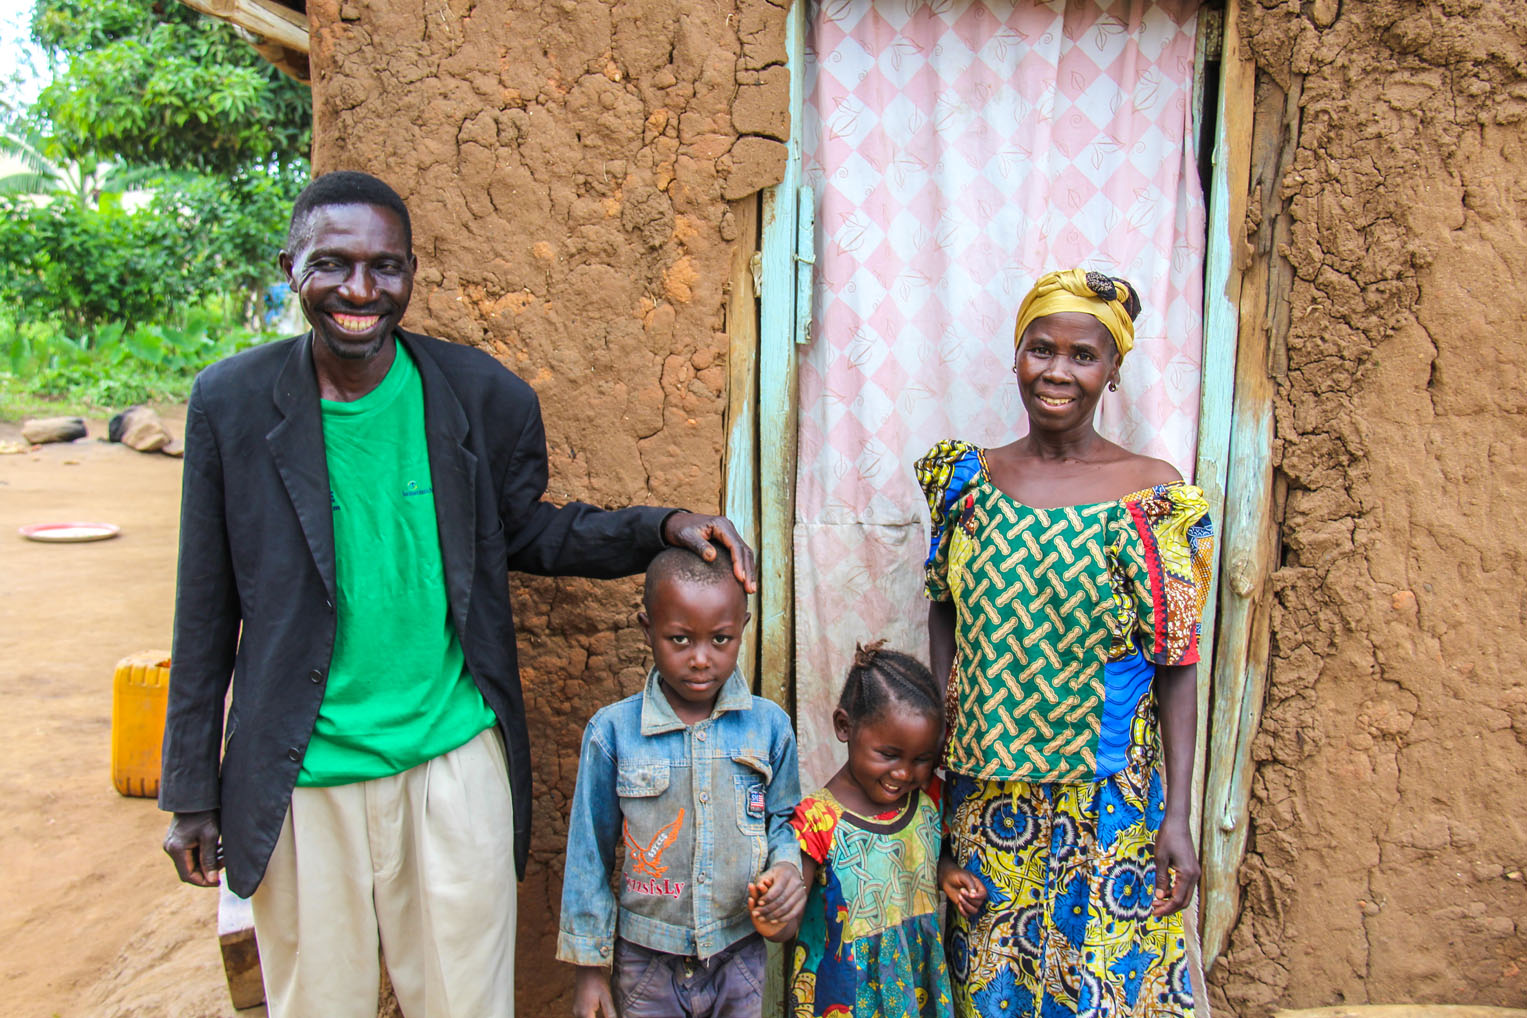 Jean and his family, one of scores of families displaced by war, needed to rebuild their lives near Bunia, capital of Democratic Republic of the Congo.